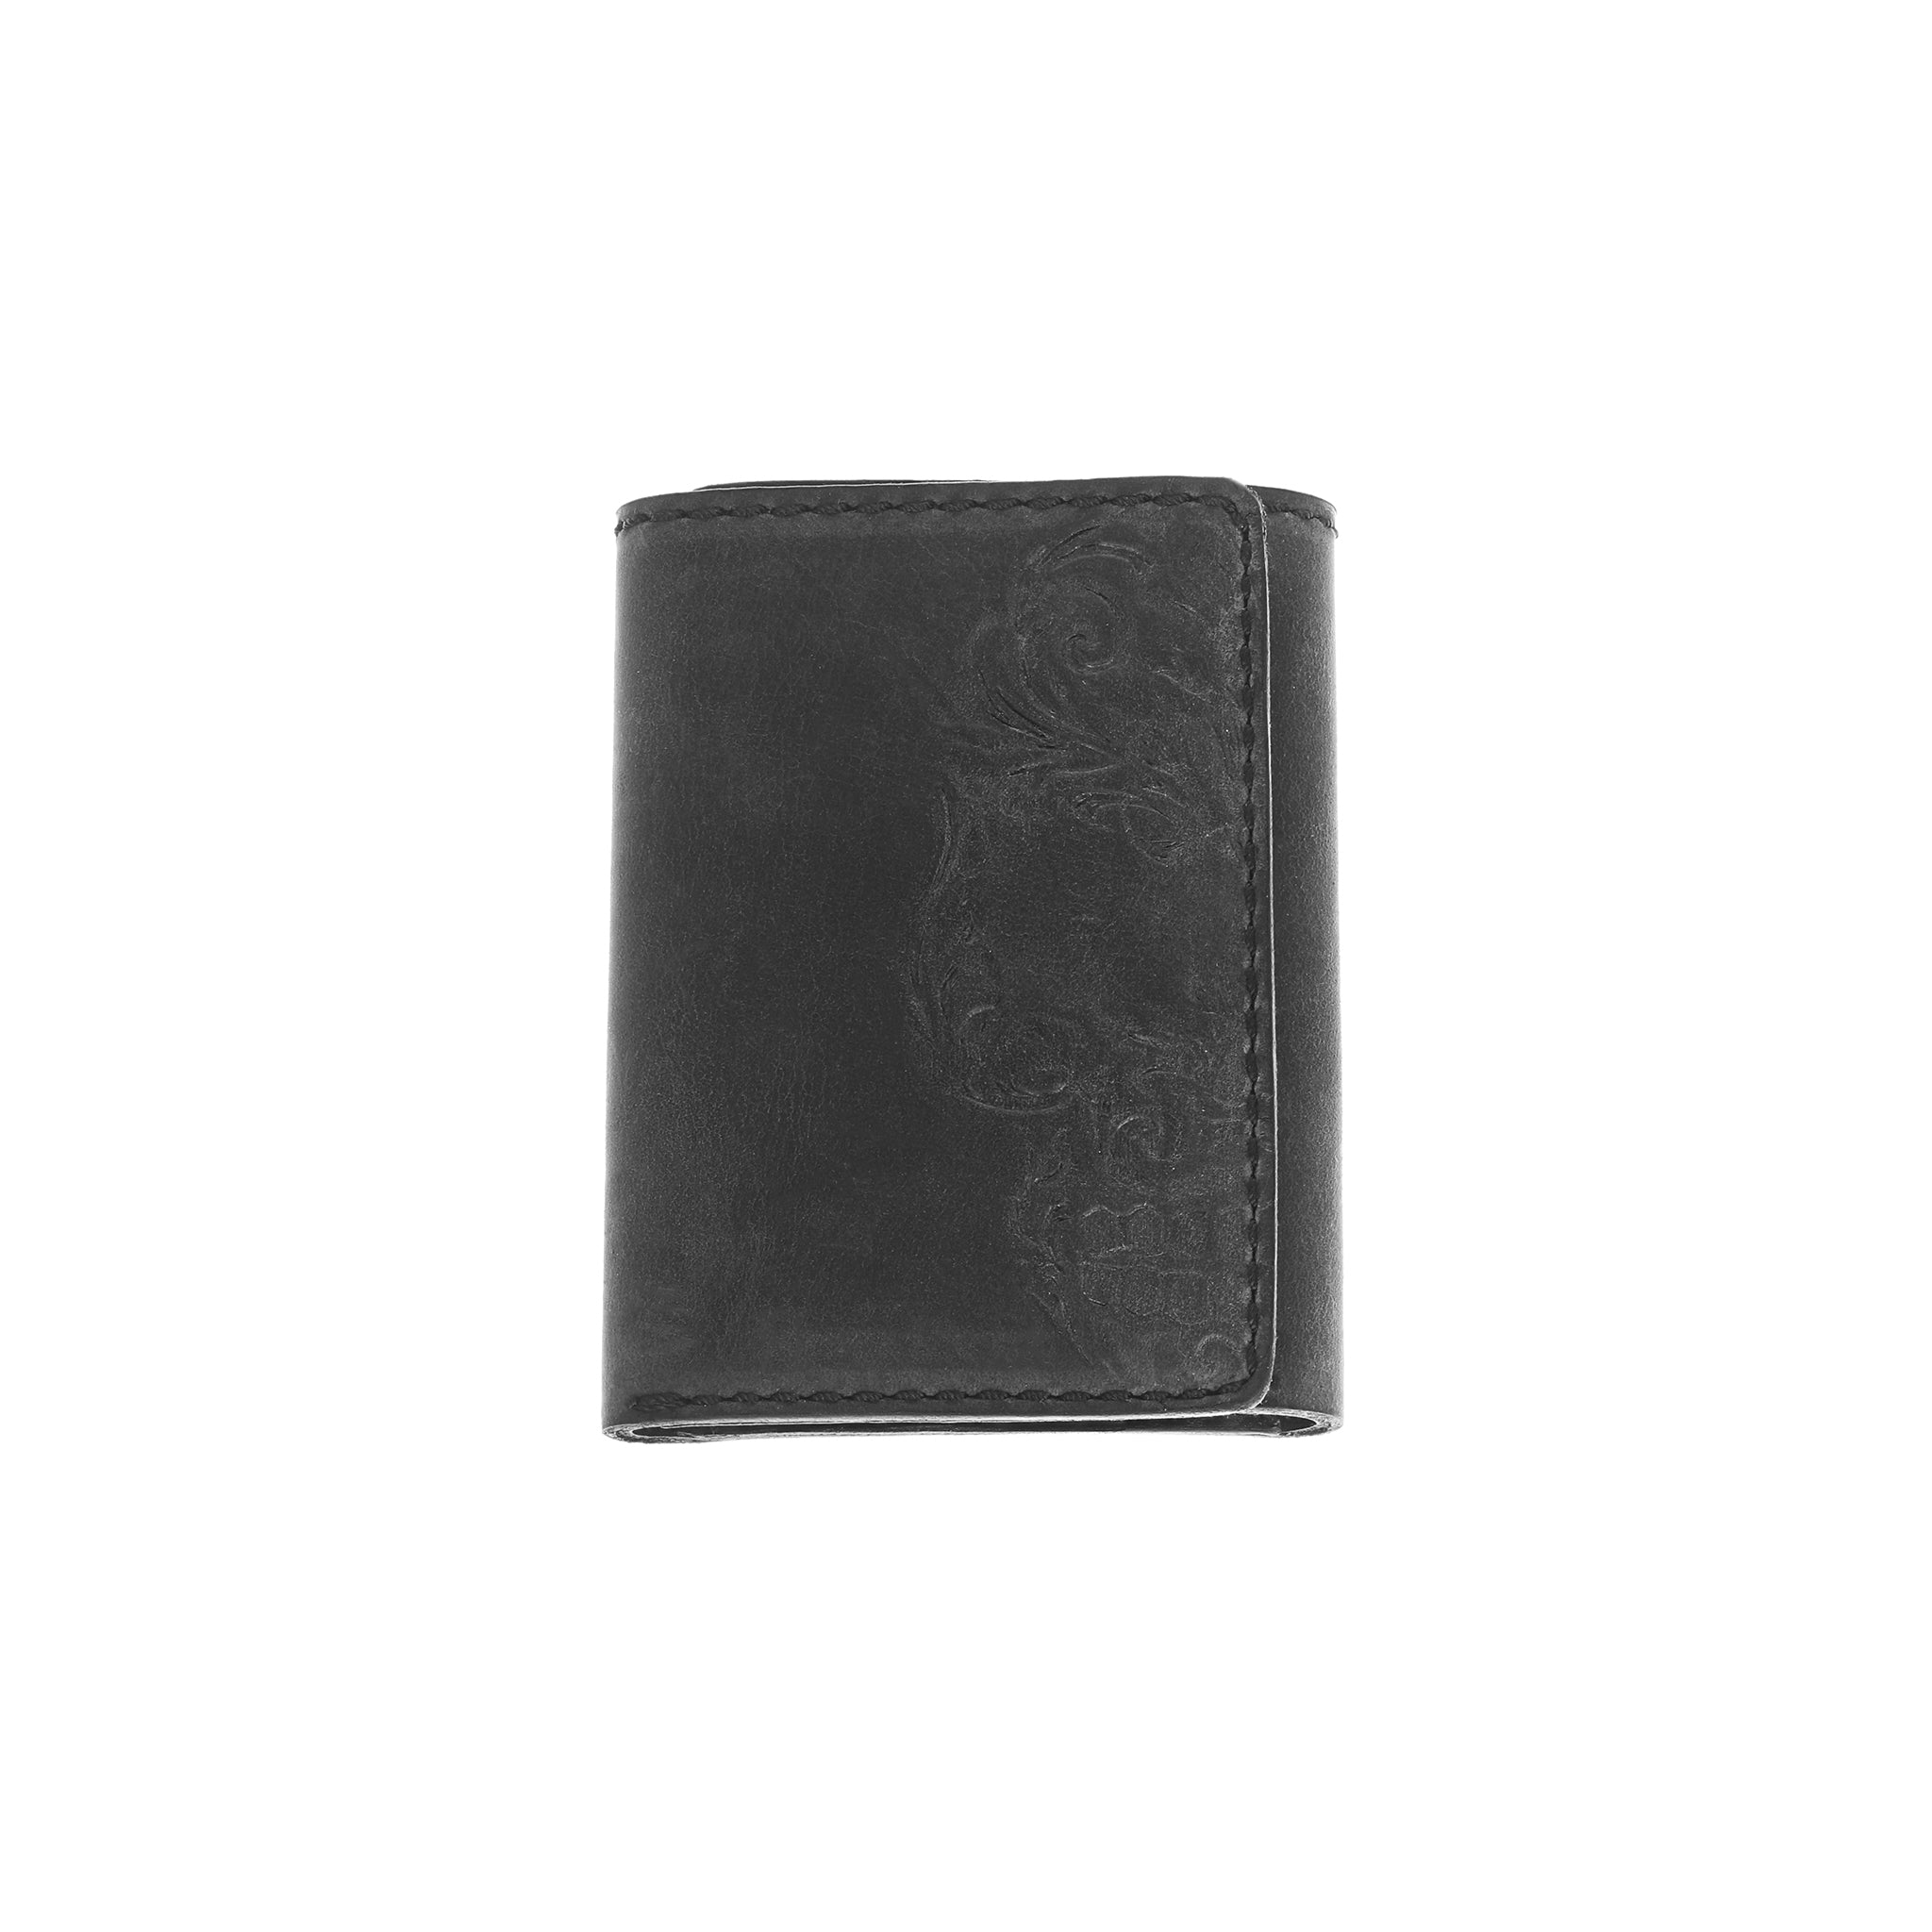 100% Brand New Men's Top ITALIAN Genuine Leather Trifold Wallet